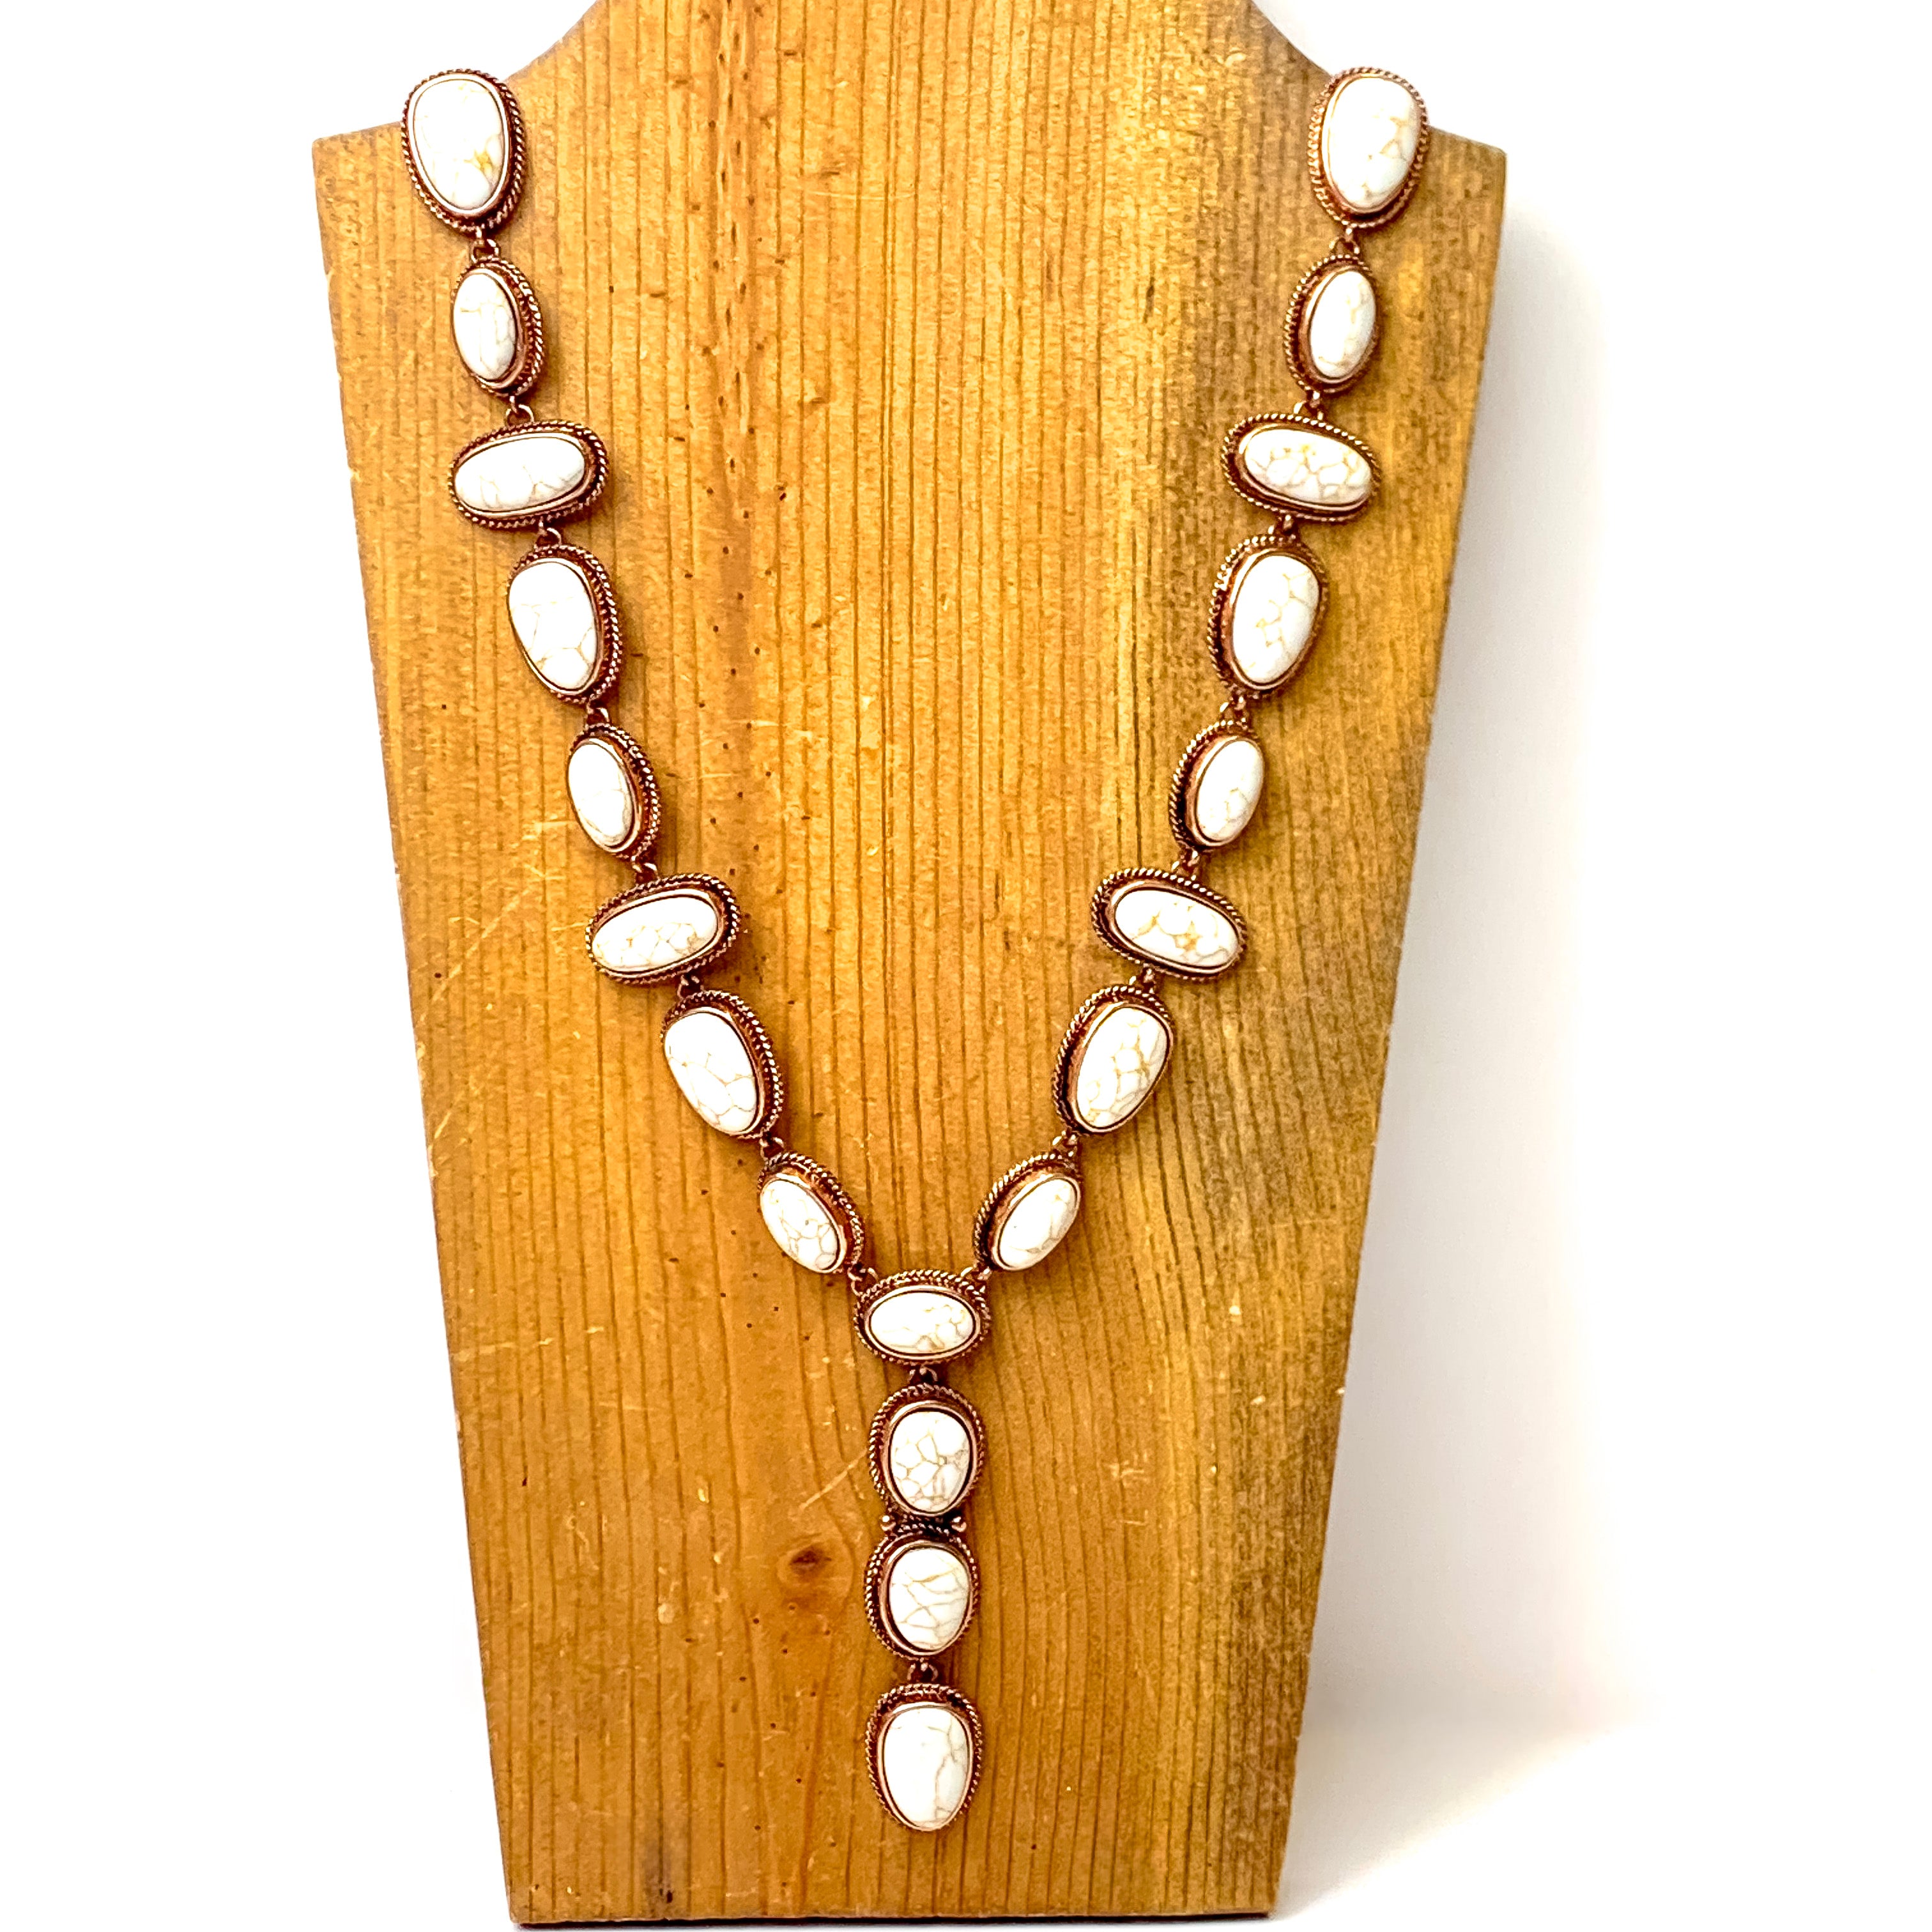 Western Stone Lariat Necklace in Ivory - Giddy Up Glamour Boutique